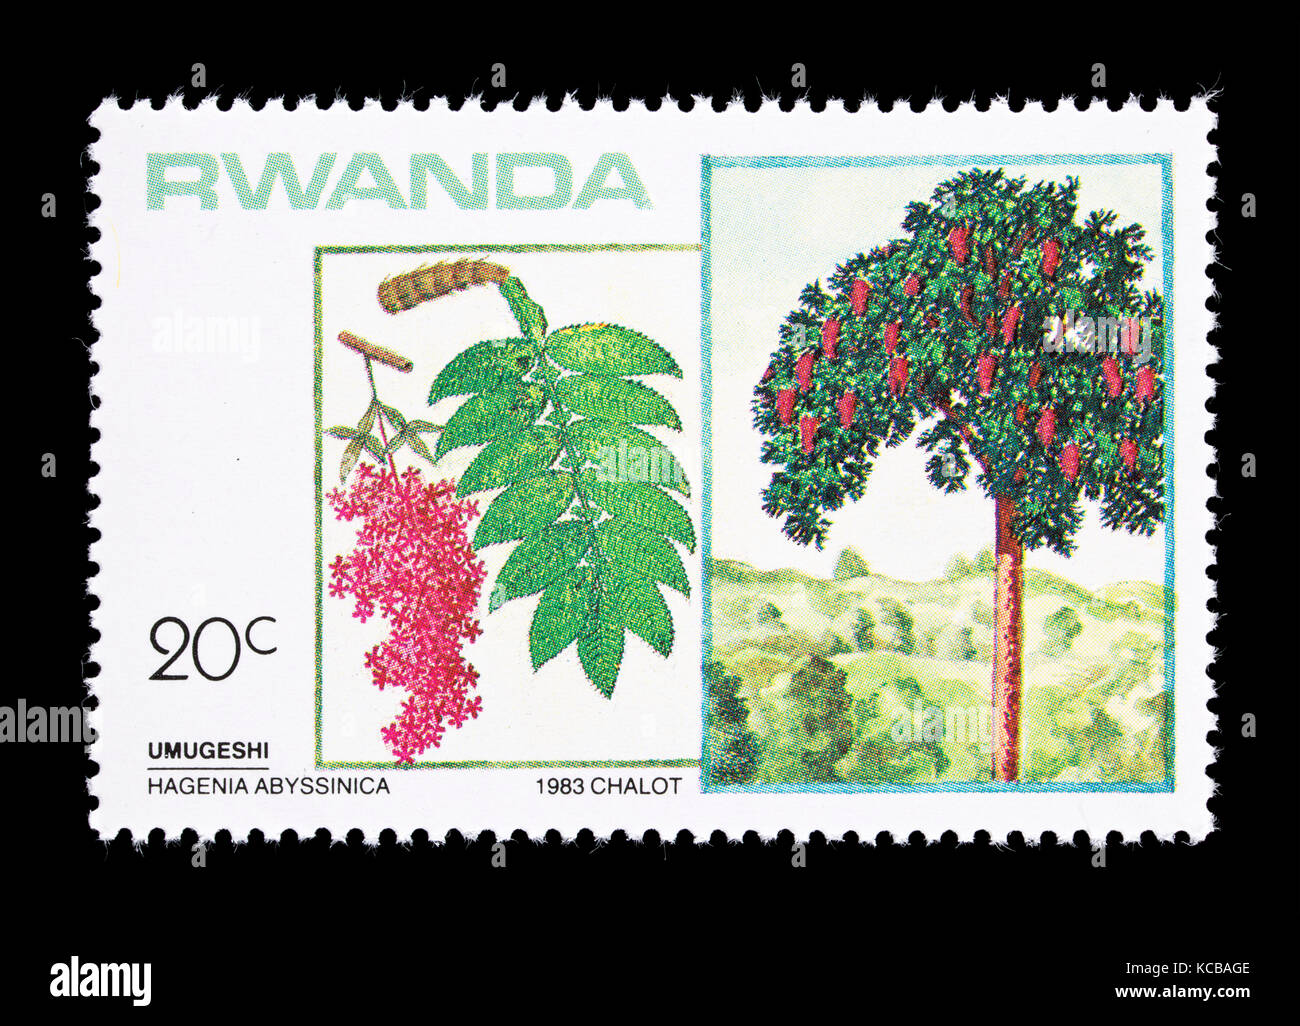 Postage stamp from Rwanda depicting a Kosso tree (Hagenia abyssinica) Stock Photo